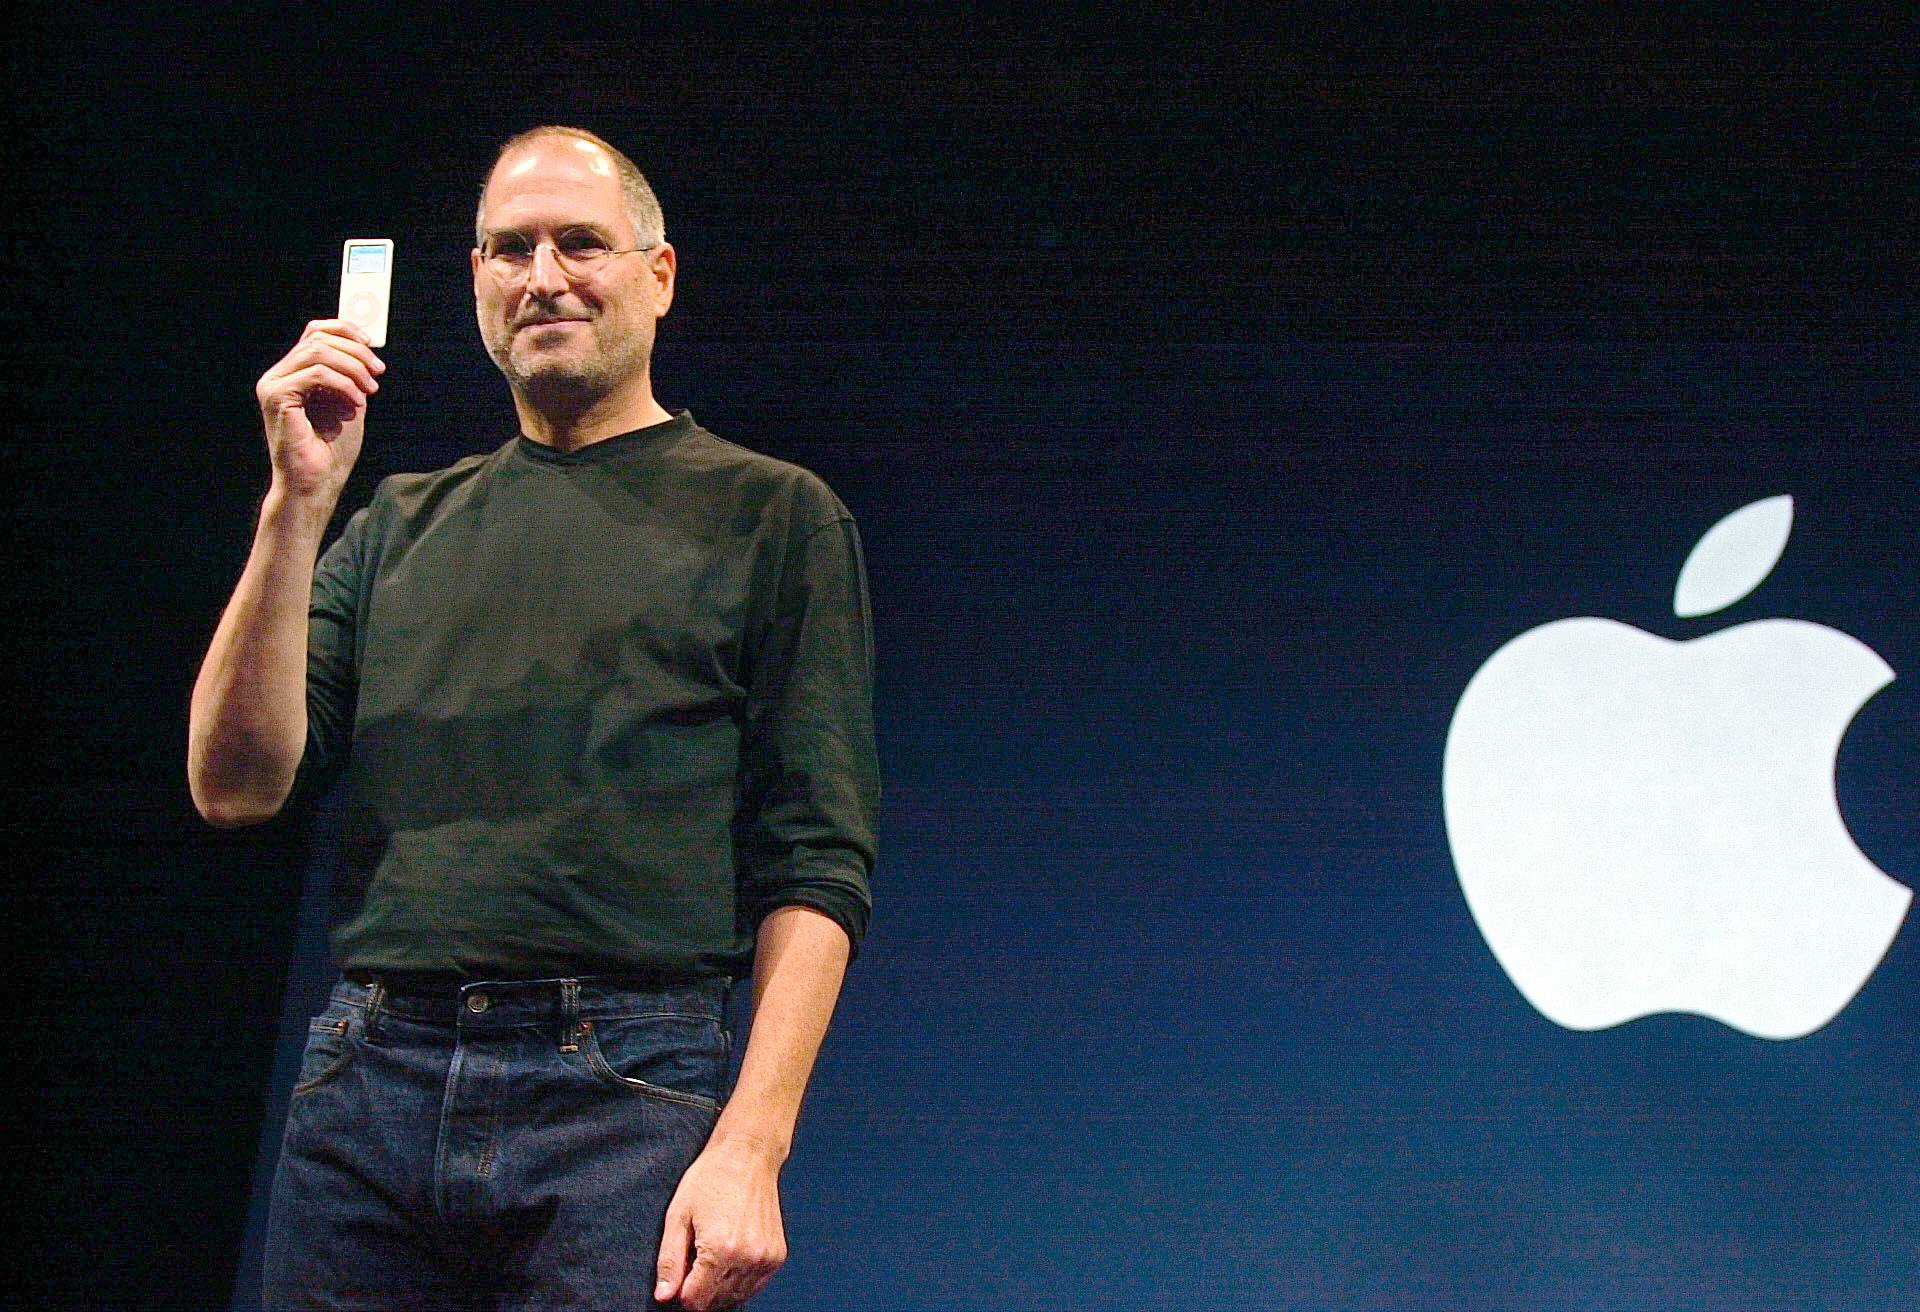 Apple CEO Steve Jobs introduces the newest iPod, the iPod Nano...